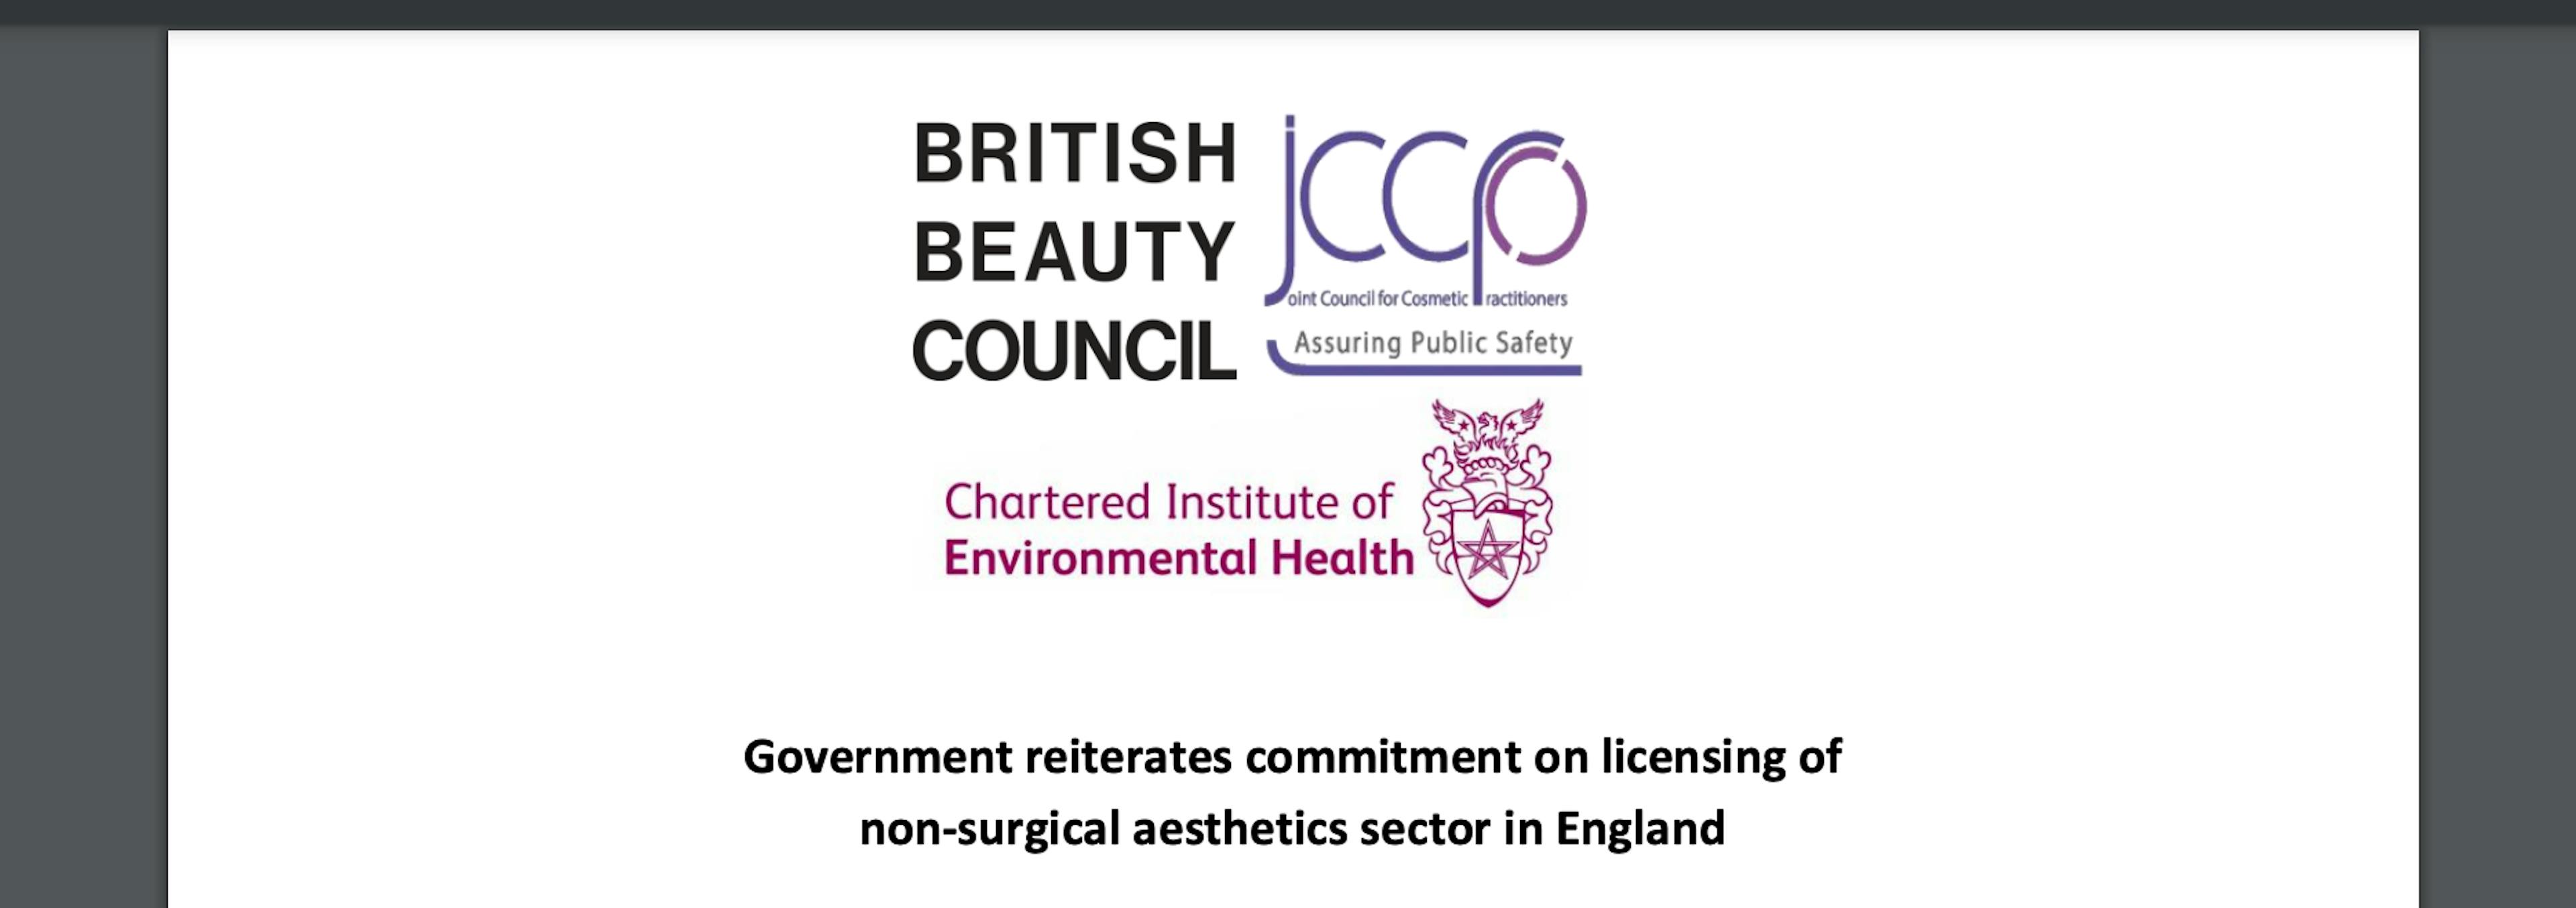 Aesthetics Licensing in England Confirmed by UK Government January 2023